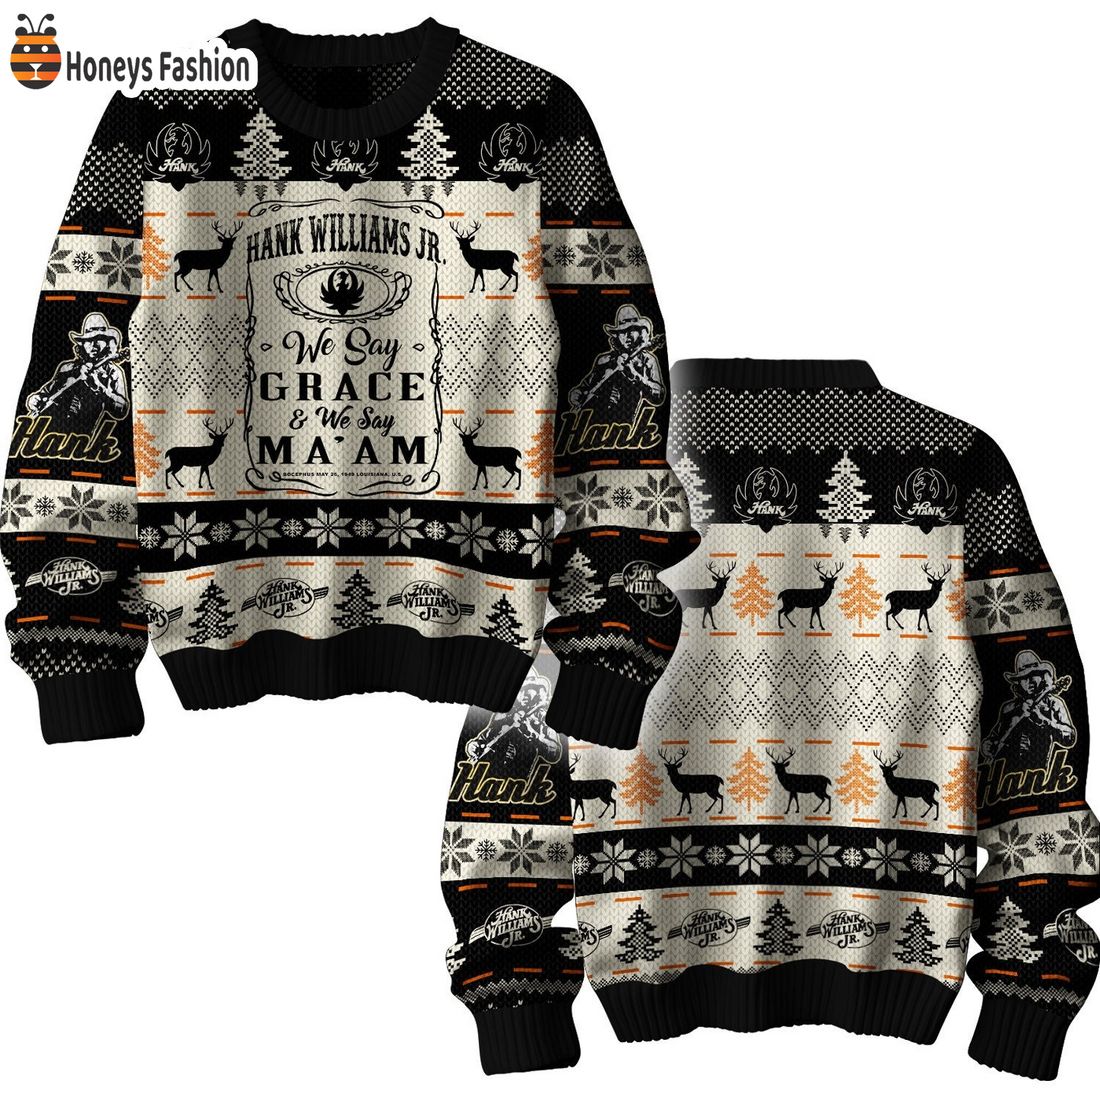 Hank Williams Jr. We Say Grace And We Say Ma'am Ugly Christmas Sweater